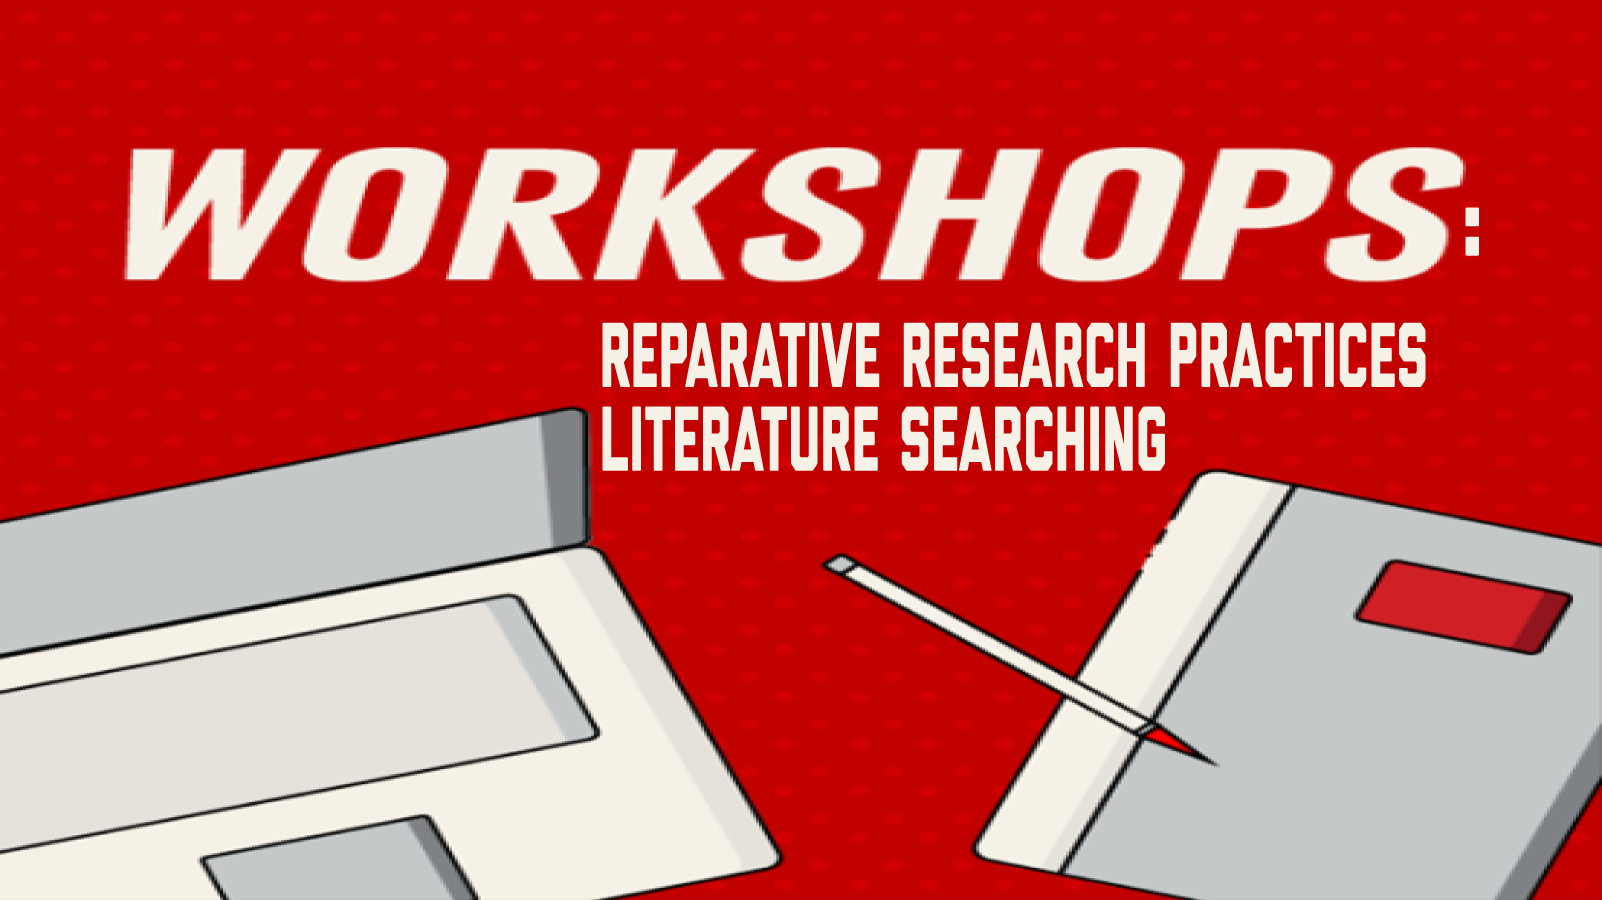 The Libraries Research Partnerships librarians are offering a variety of workshops in March and April.